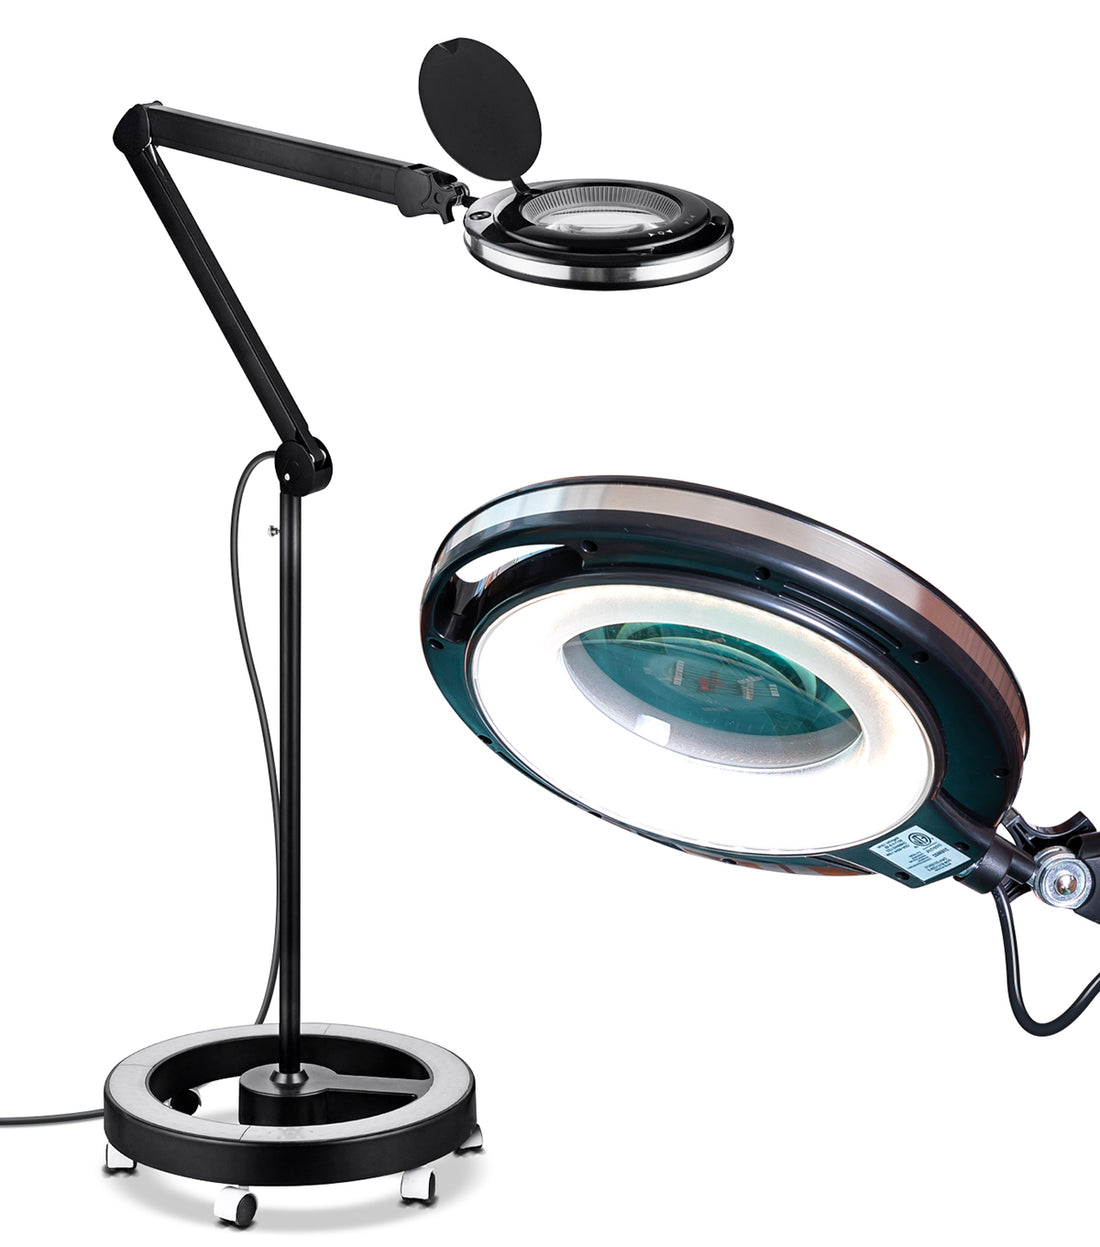 Find Lighting & Magnifiers - Needlework Projects, Tools & Accessories